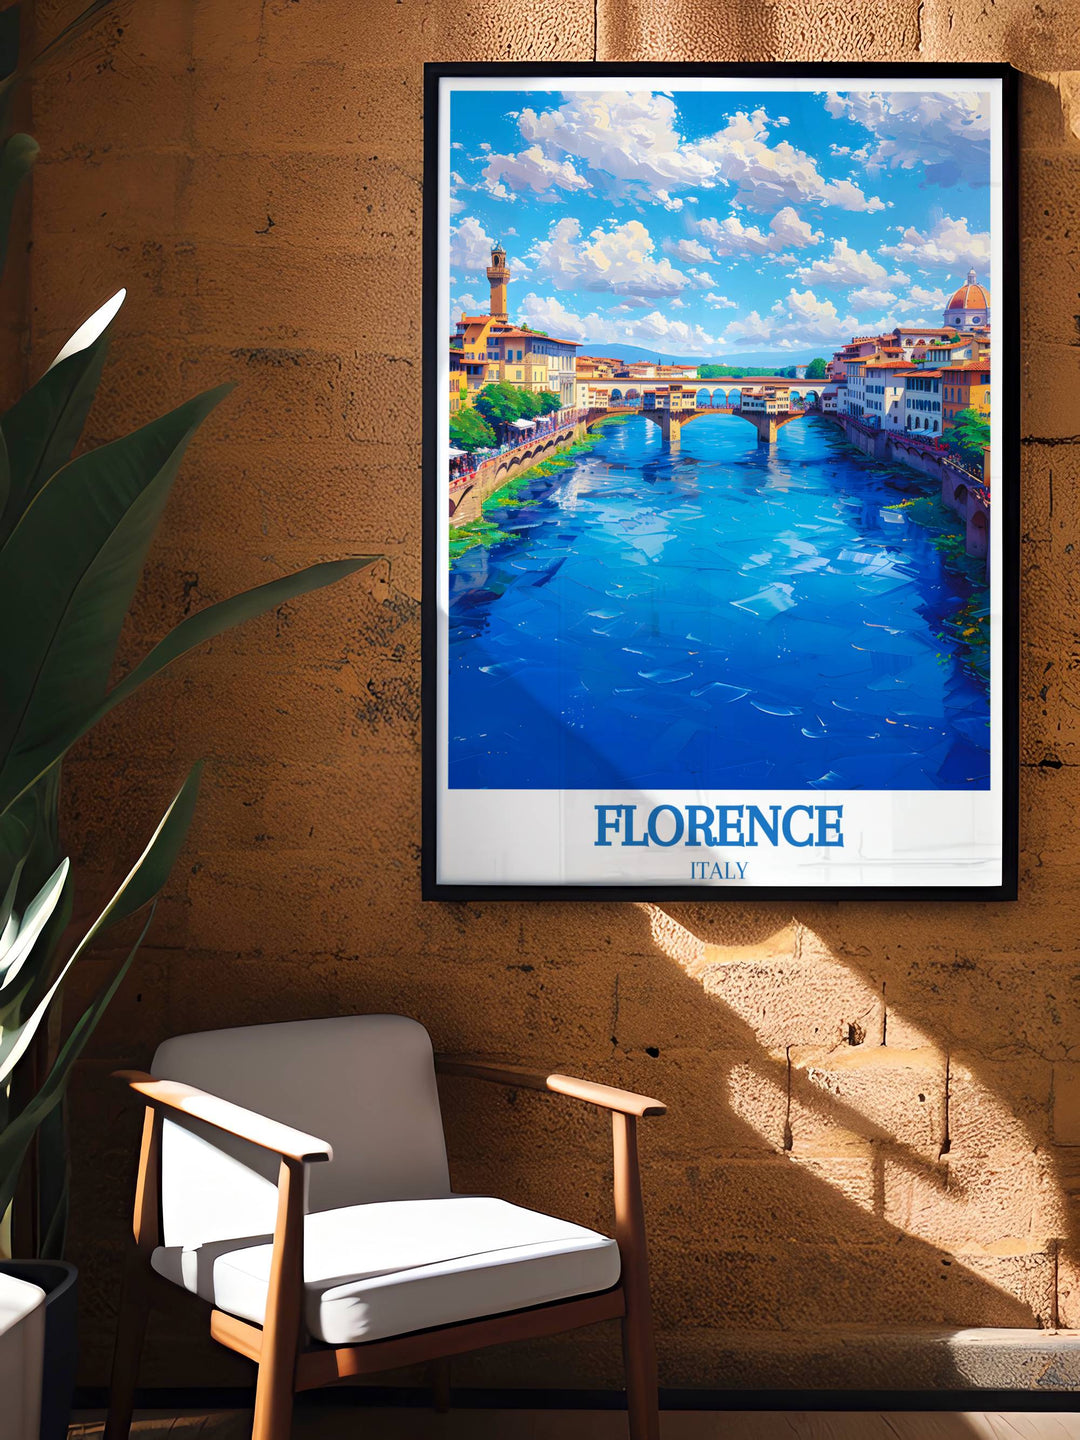 Breathtaking view of Florence captured in a Travel Print Wall Art piece highlighting the citys artistic and cultural heritage for a refined home decor choice